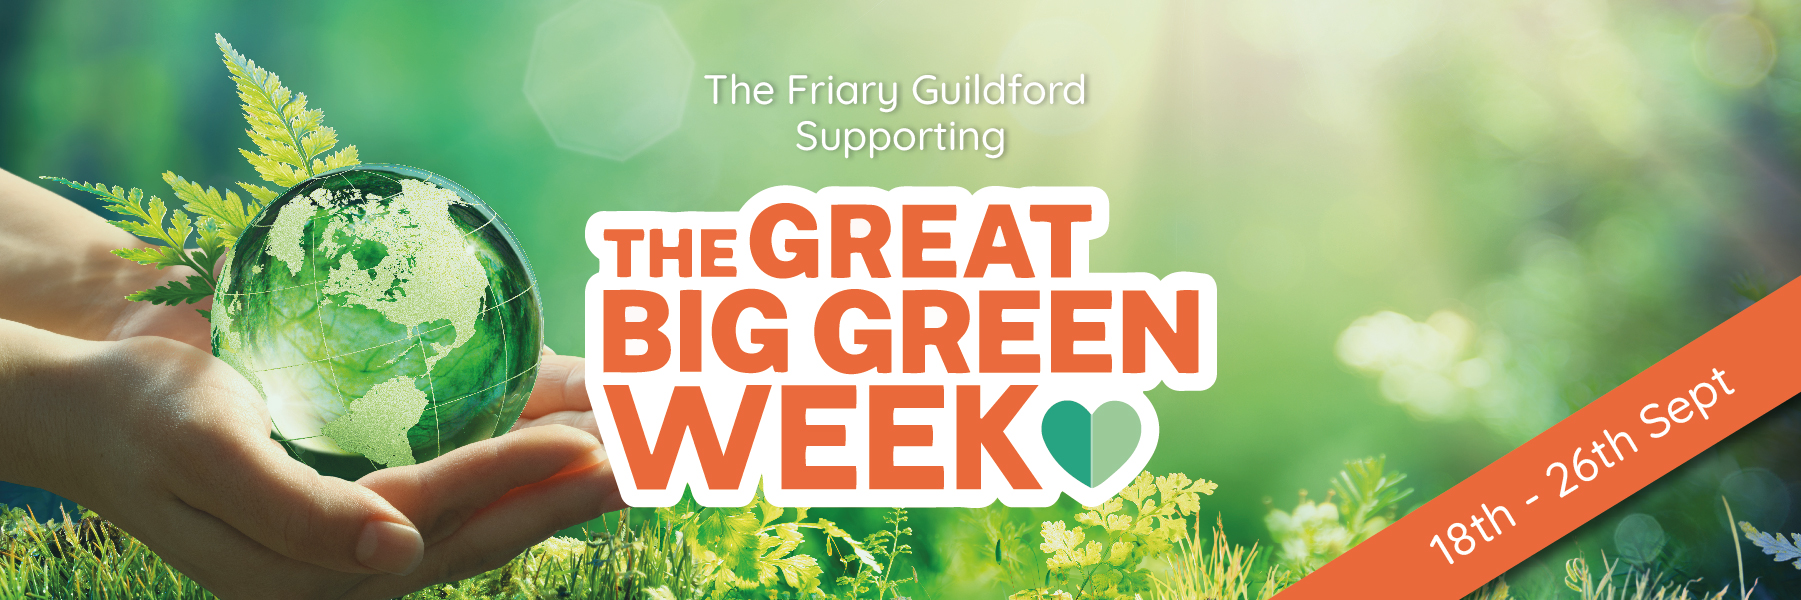 The Friary Guildford Supports The Great Big Green Week